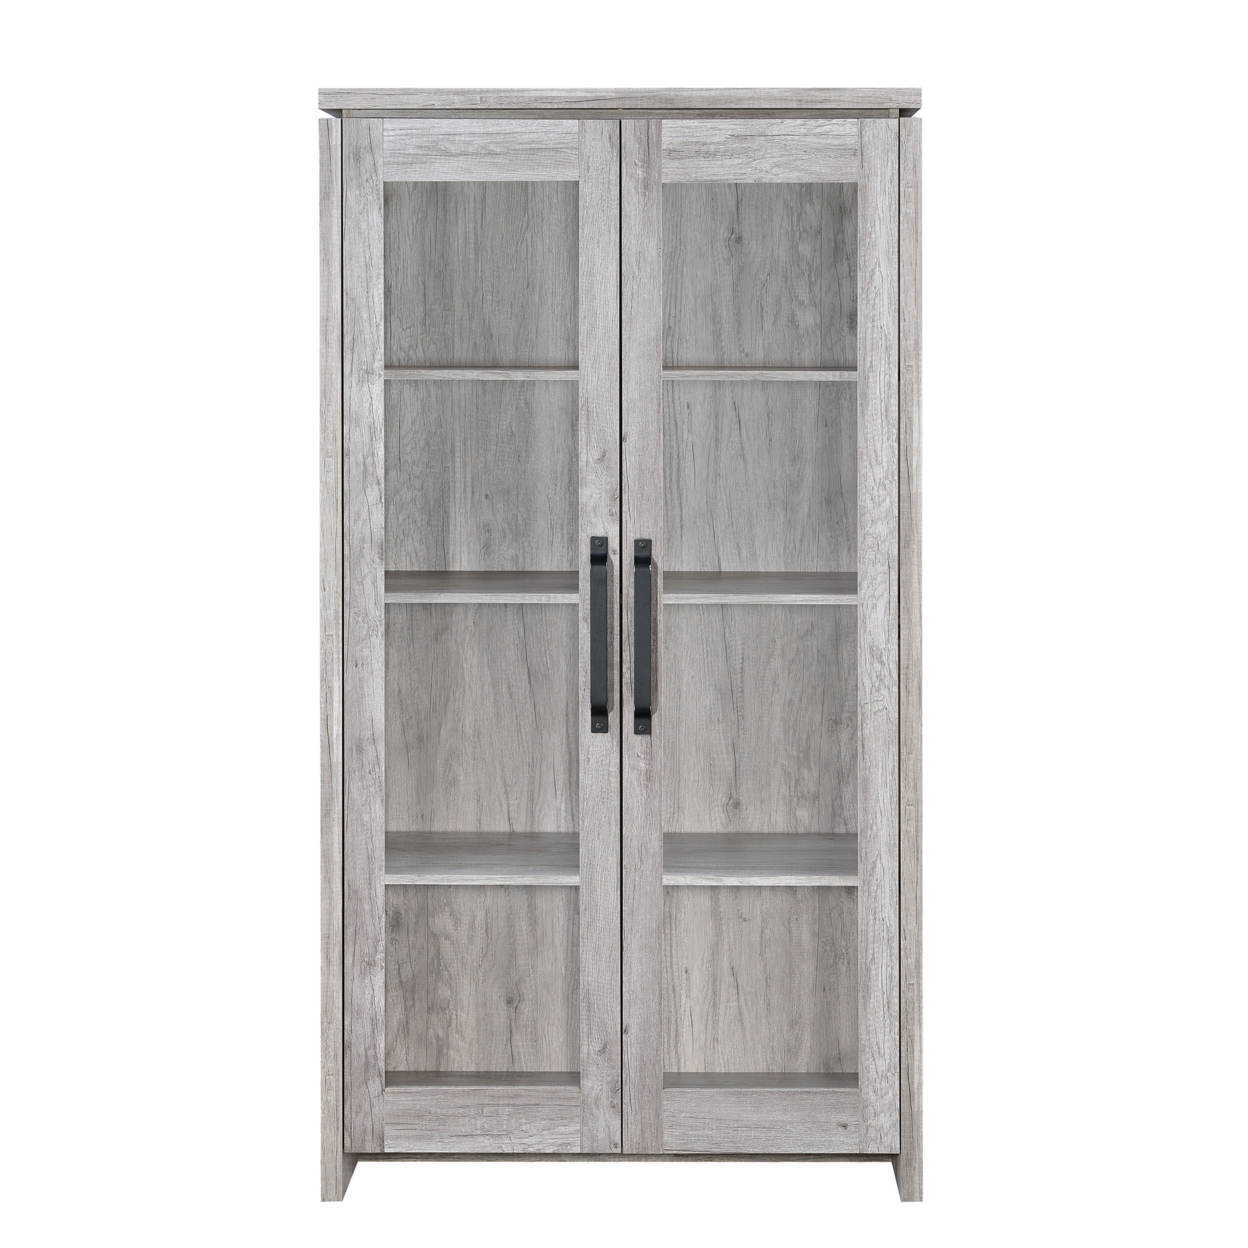 Spacious Wooden Curio Cabinet With Two Glass Doors, Gray- Saltoro Sherpi